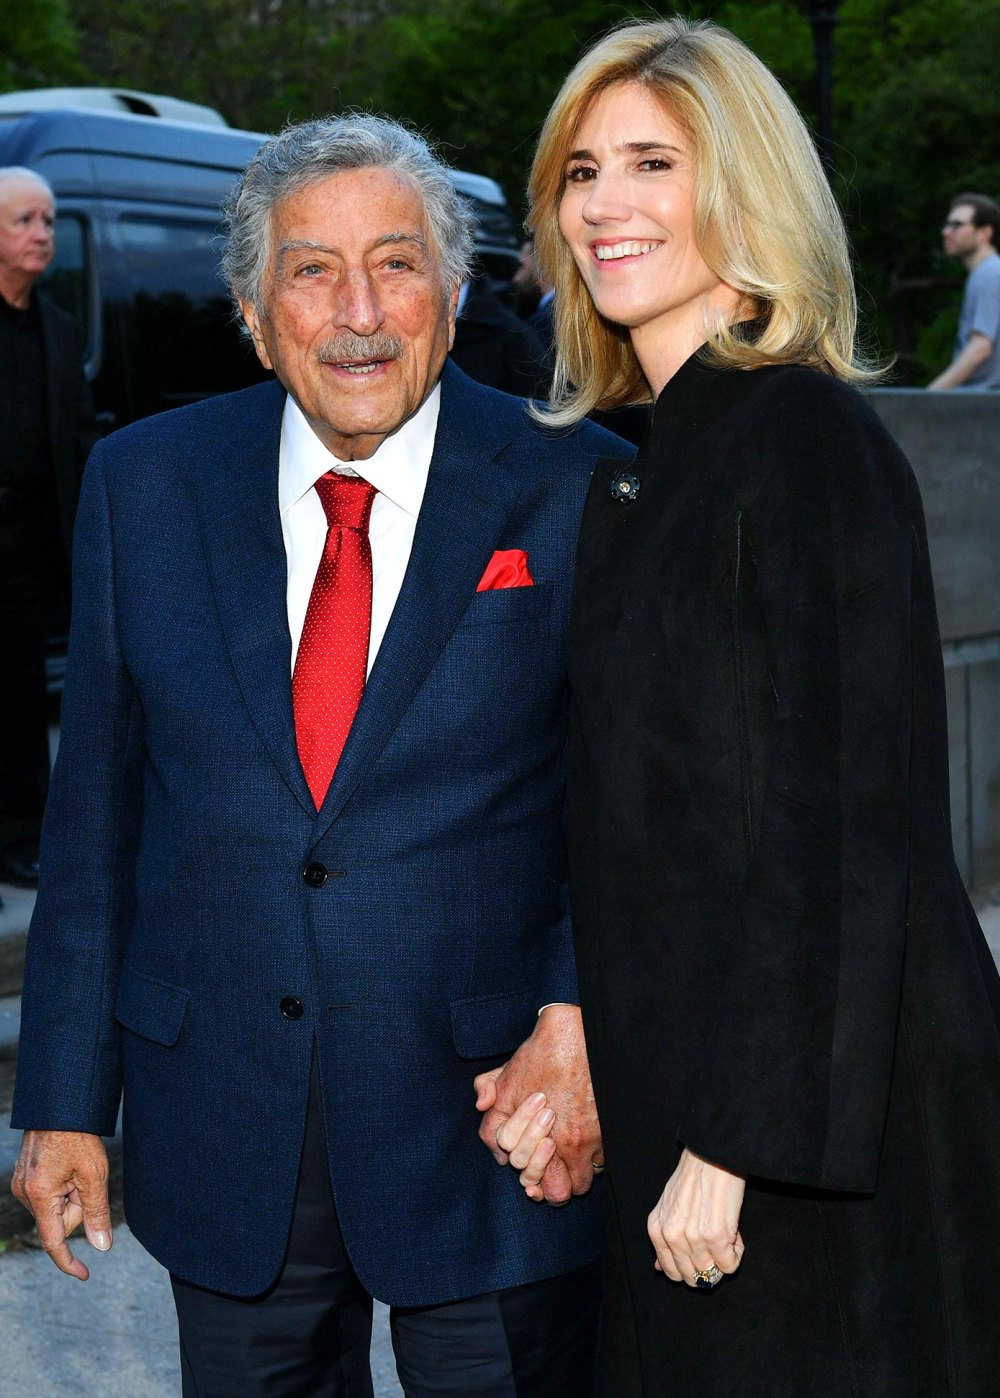 2023 Tony Bennett and Wife Susan Crow Timeline of Their Relationship